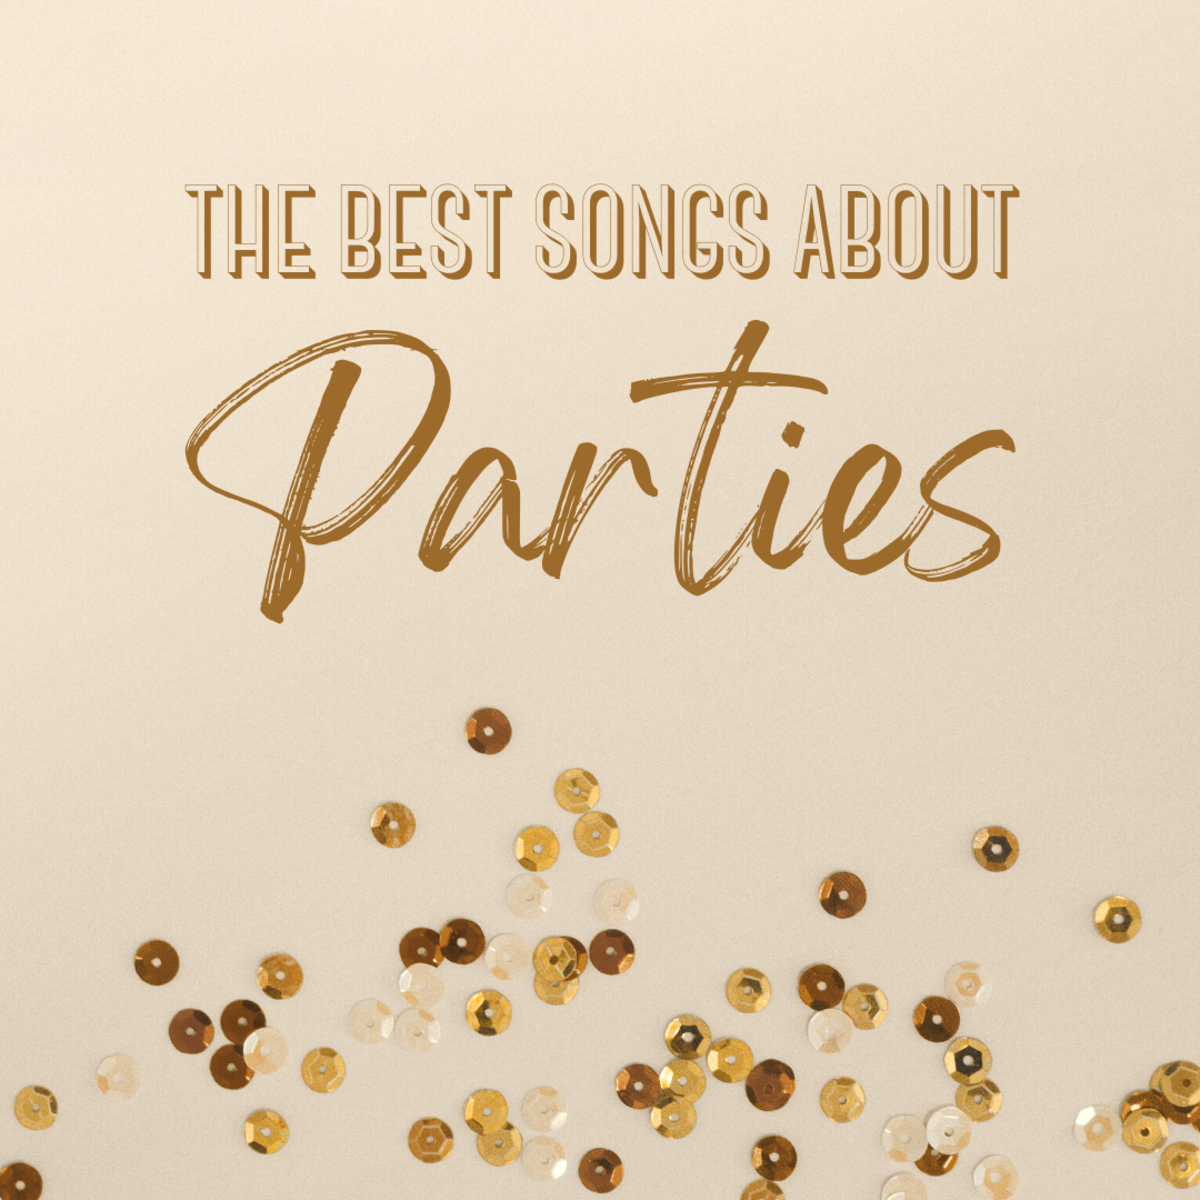 100 Best Songs About Parties